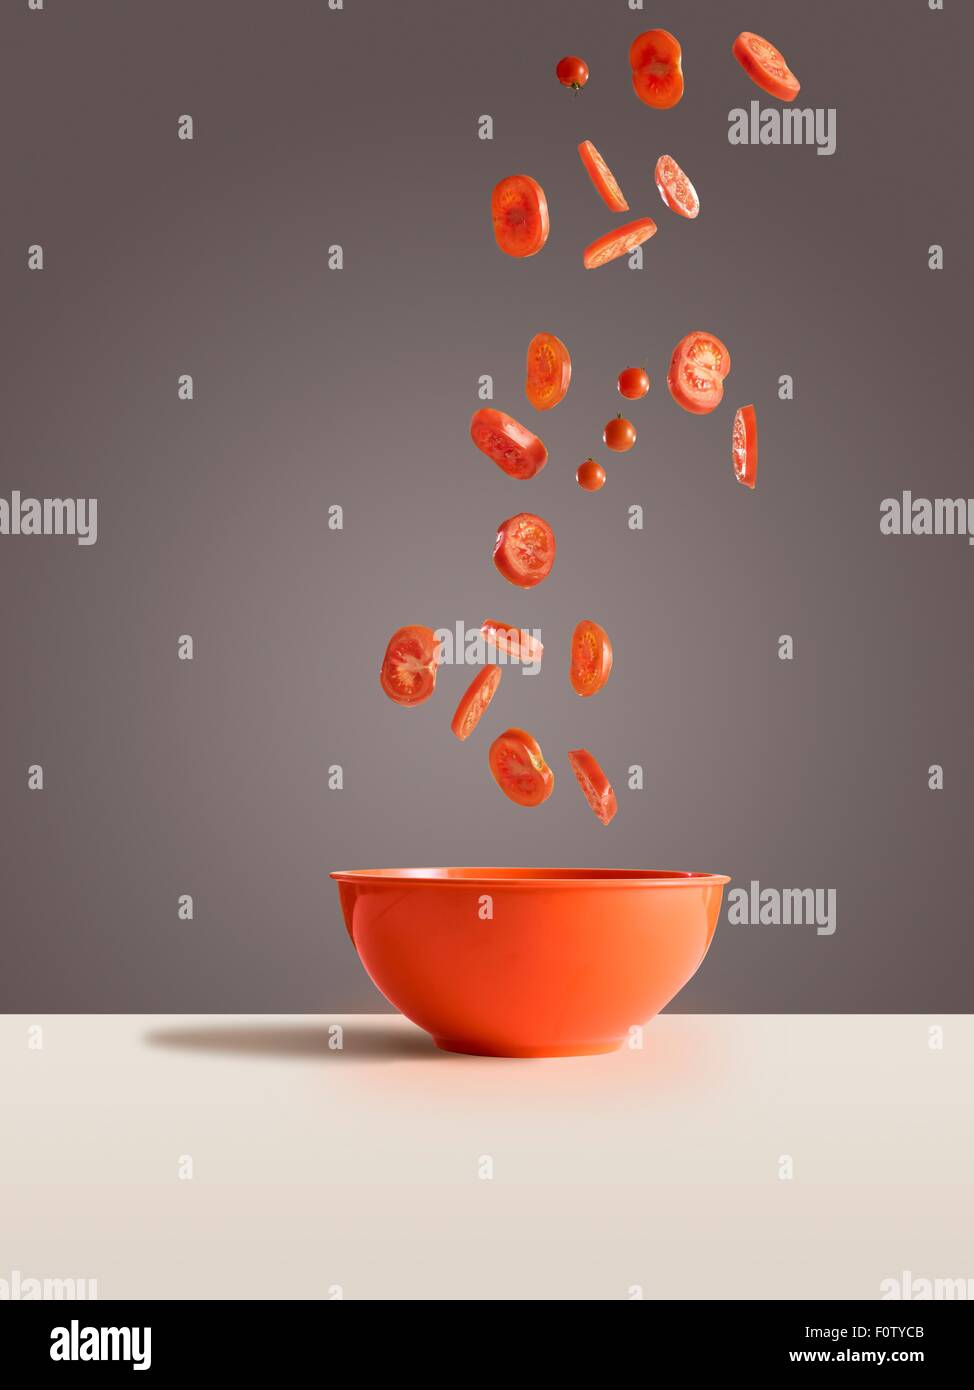 Fresh sliced tomatoes dropping into red bowl Stock Photo